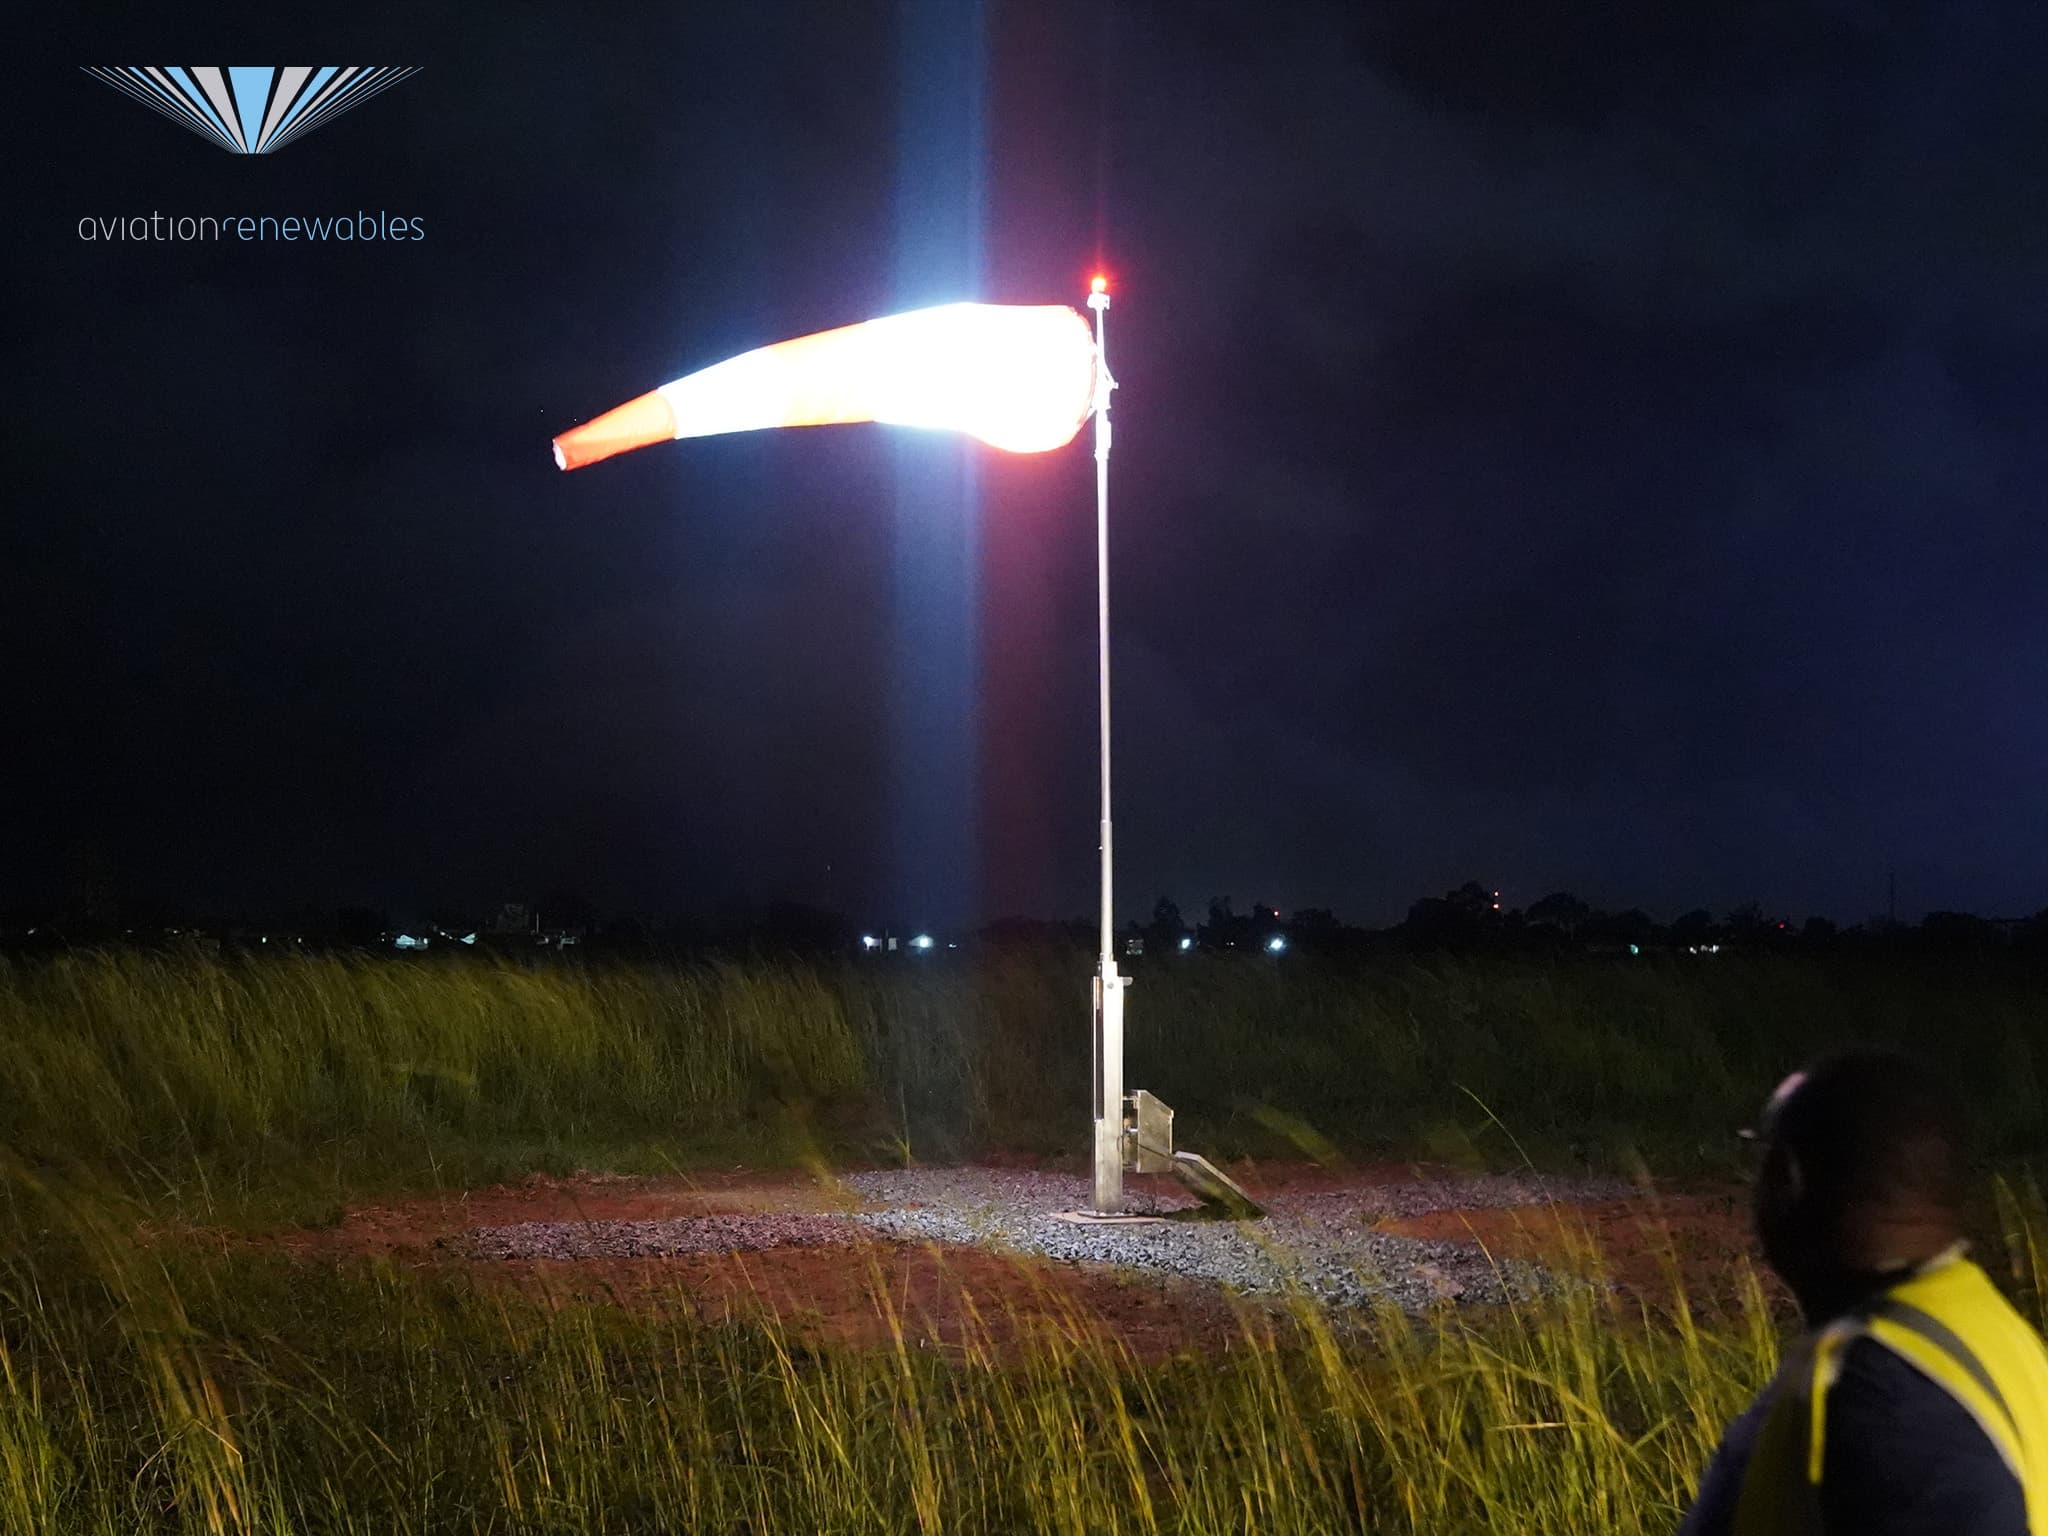 Windsock-lighting-solution-commissioned-by-aviation-renewables